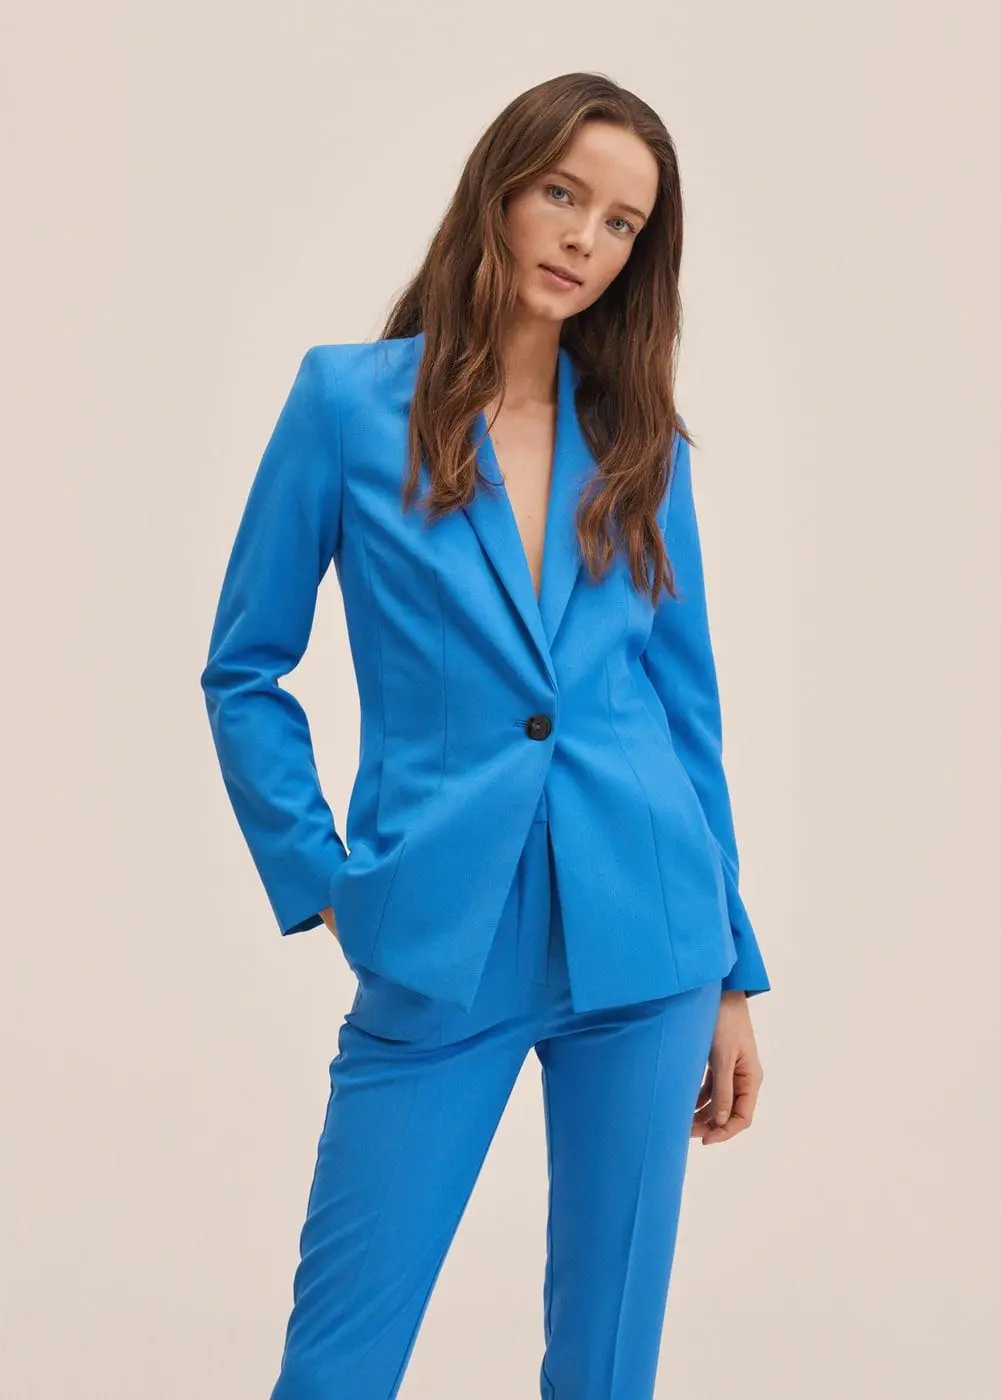 Casual Women Suits High End Formal Interview Slim Fit Blazer and Pants Office Ladies Fashion Workwear